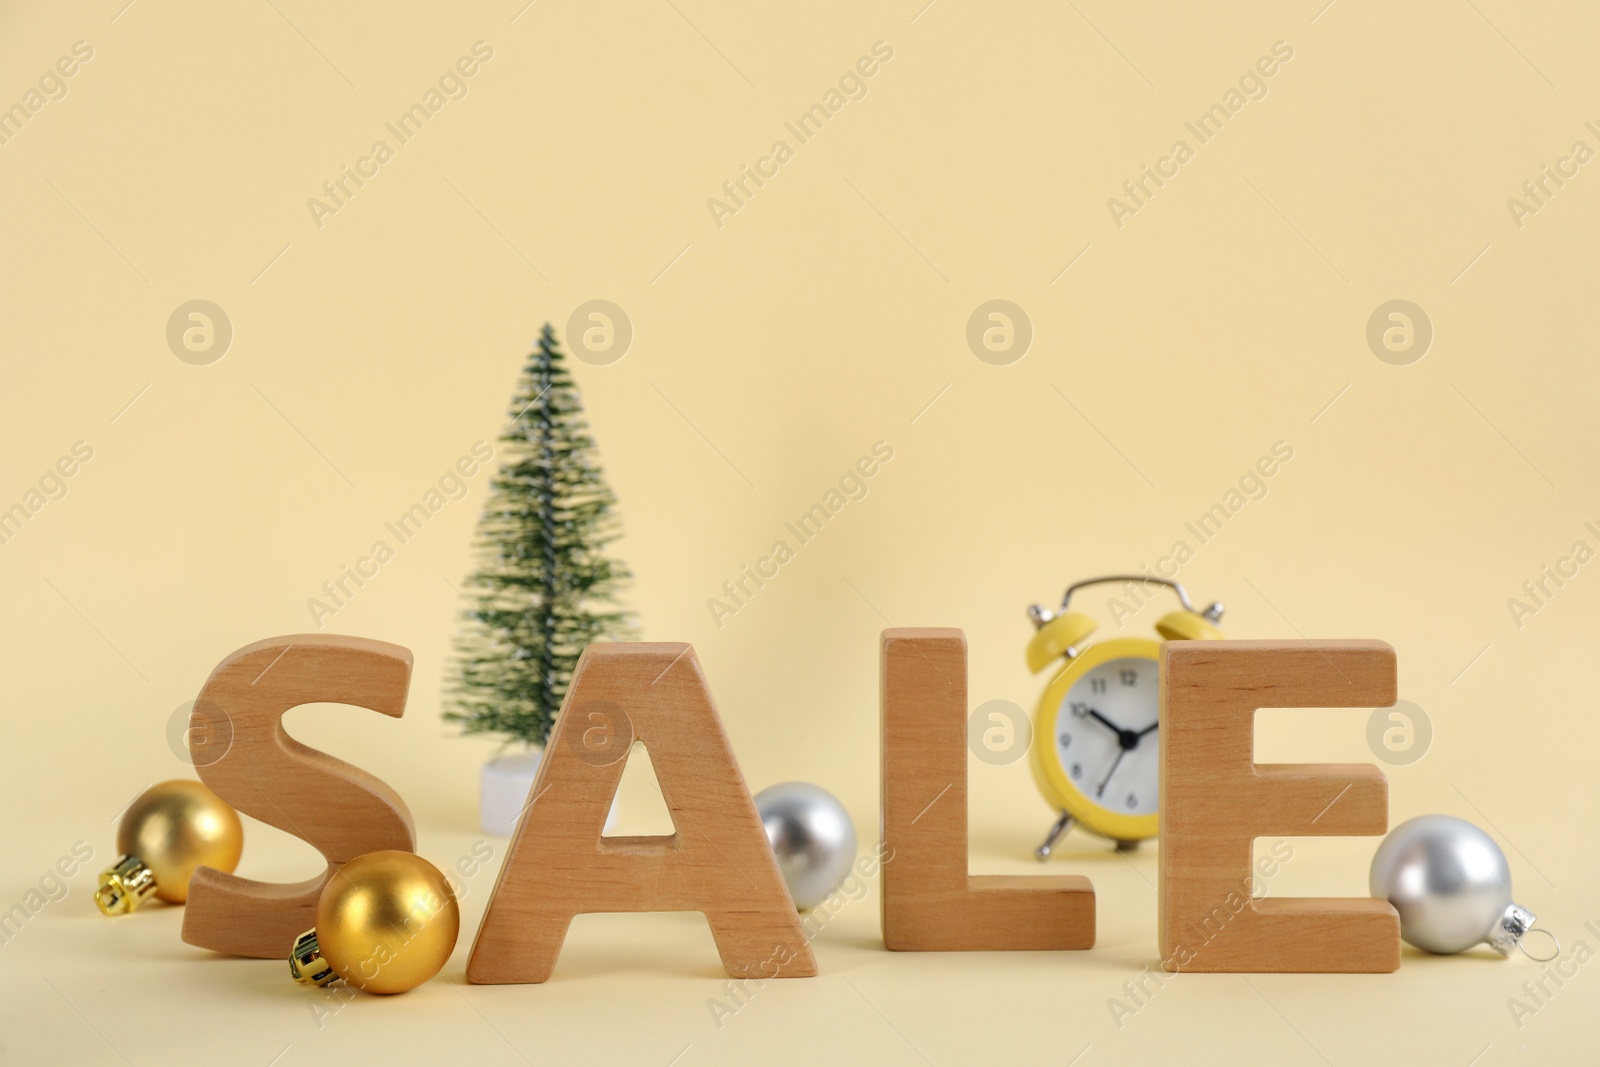 Photo of Word Sale made with wooden letters and Christmas decor on beige background